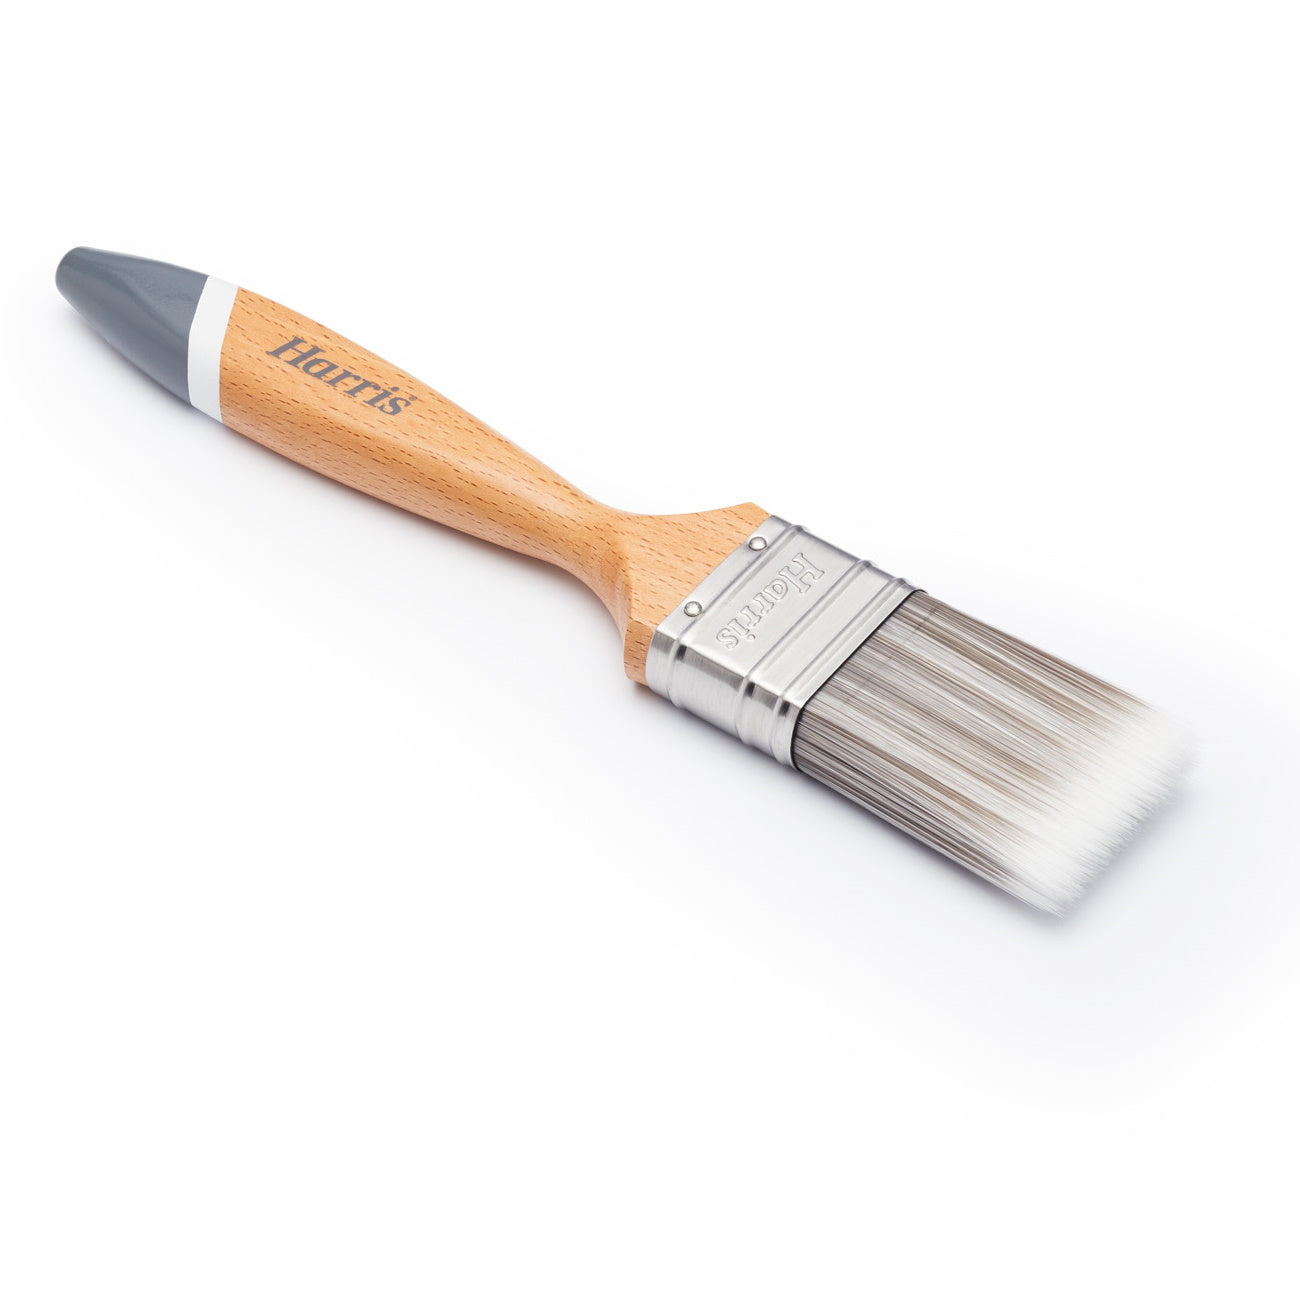 Harris Ultimate Walls & Ceilings Paint Brushes - Various Sizes - Premium Paint Brushes from HARRIS - Just $3.20! Shop now at W Hurst & Son (IW) Ltd